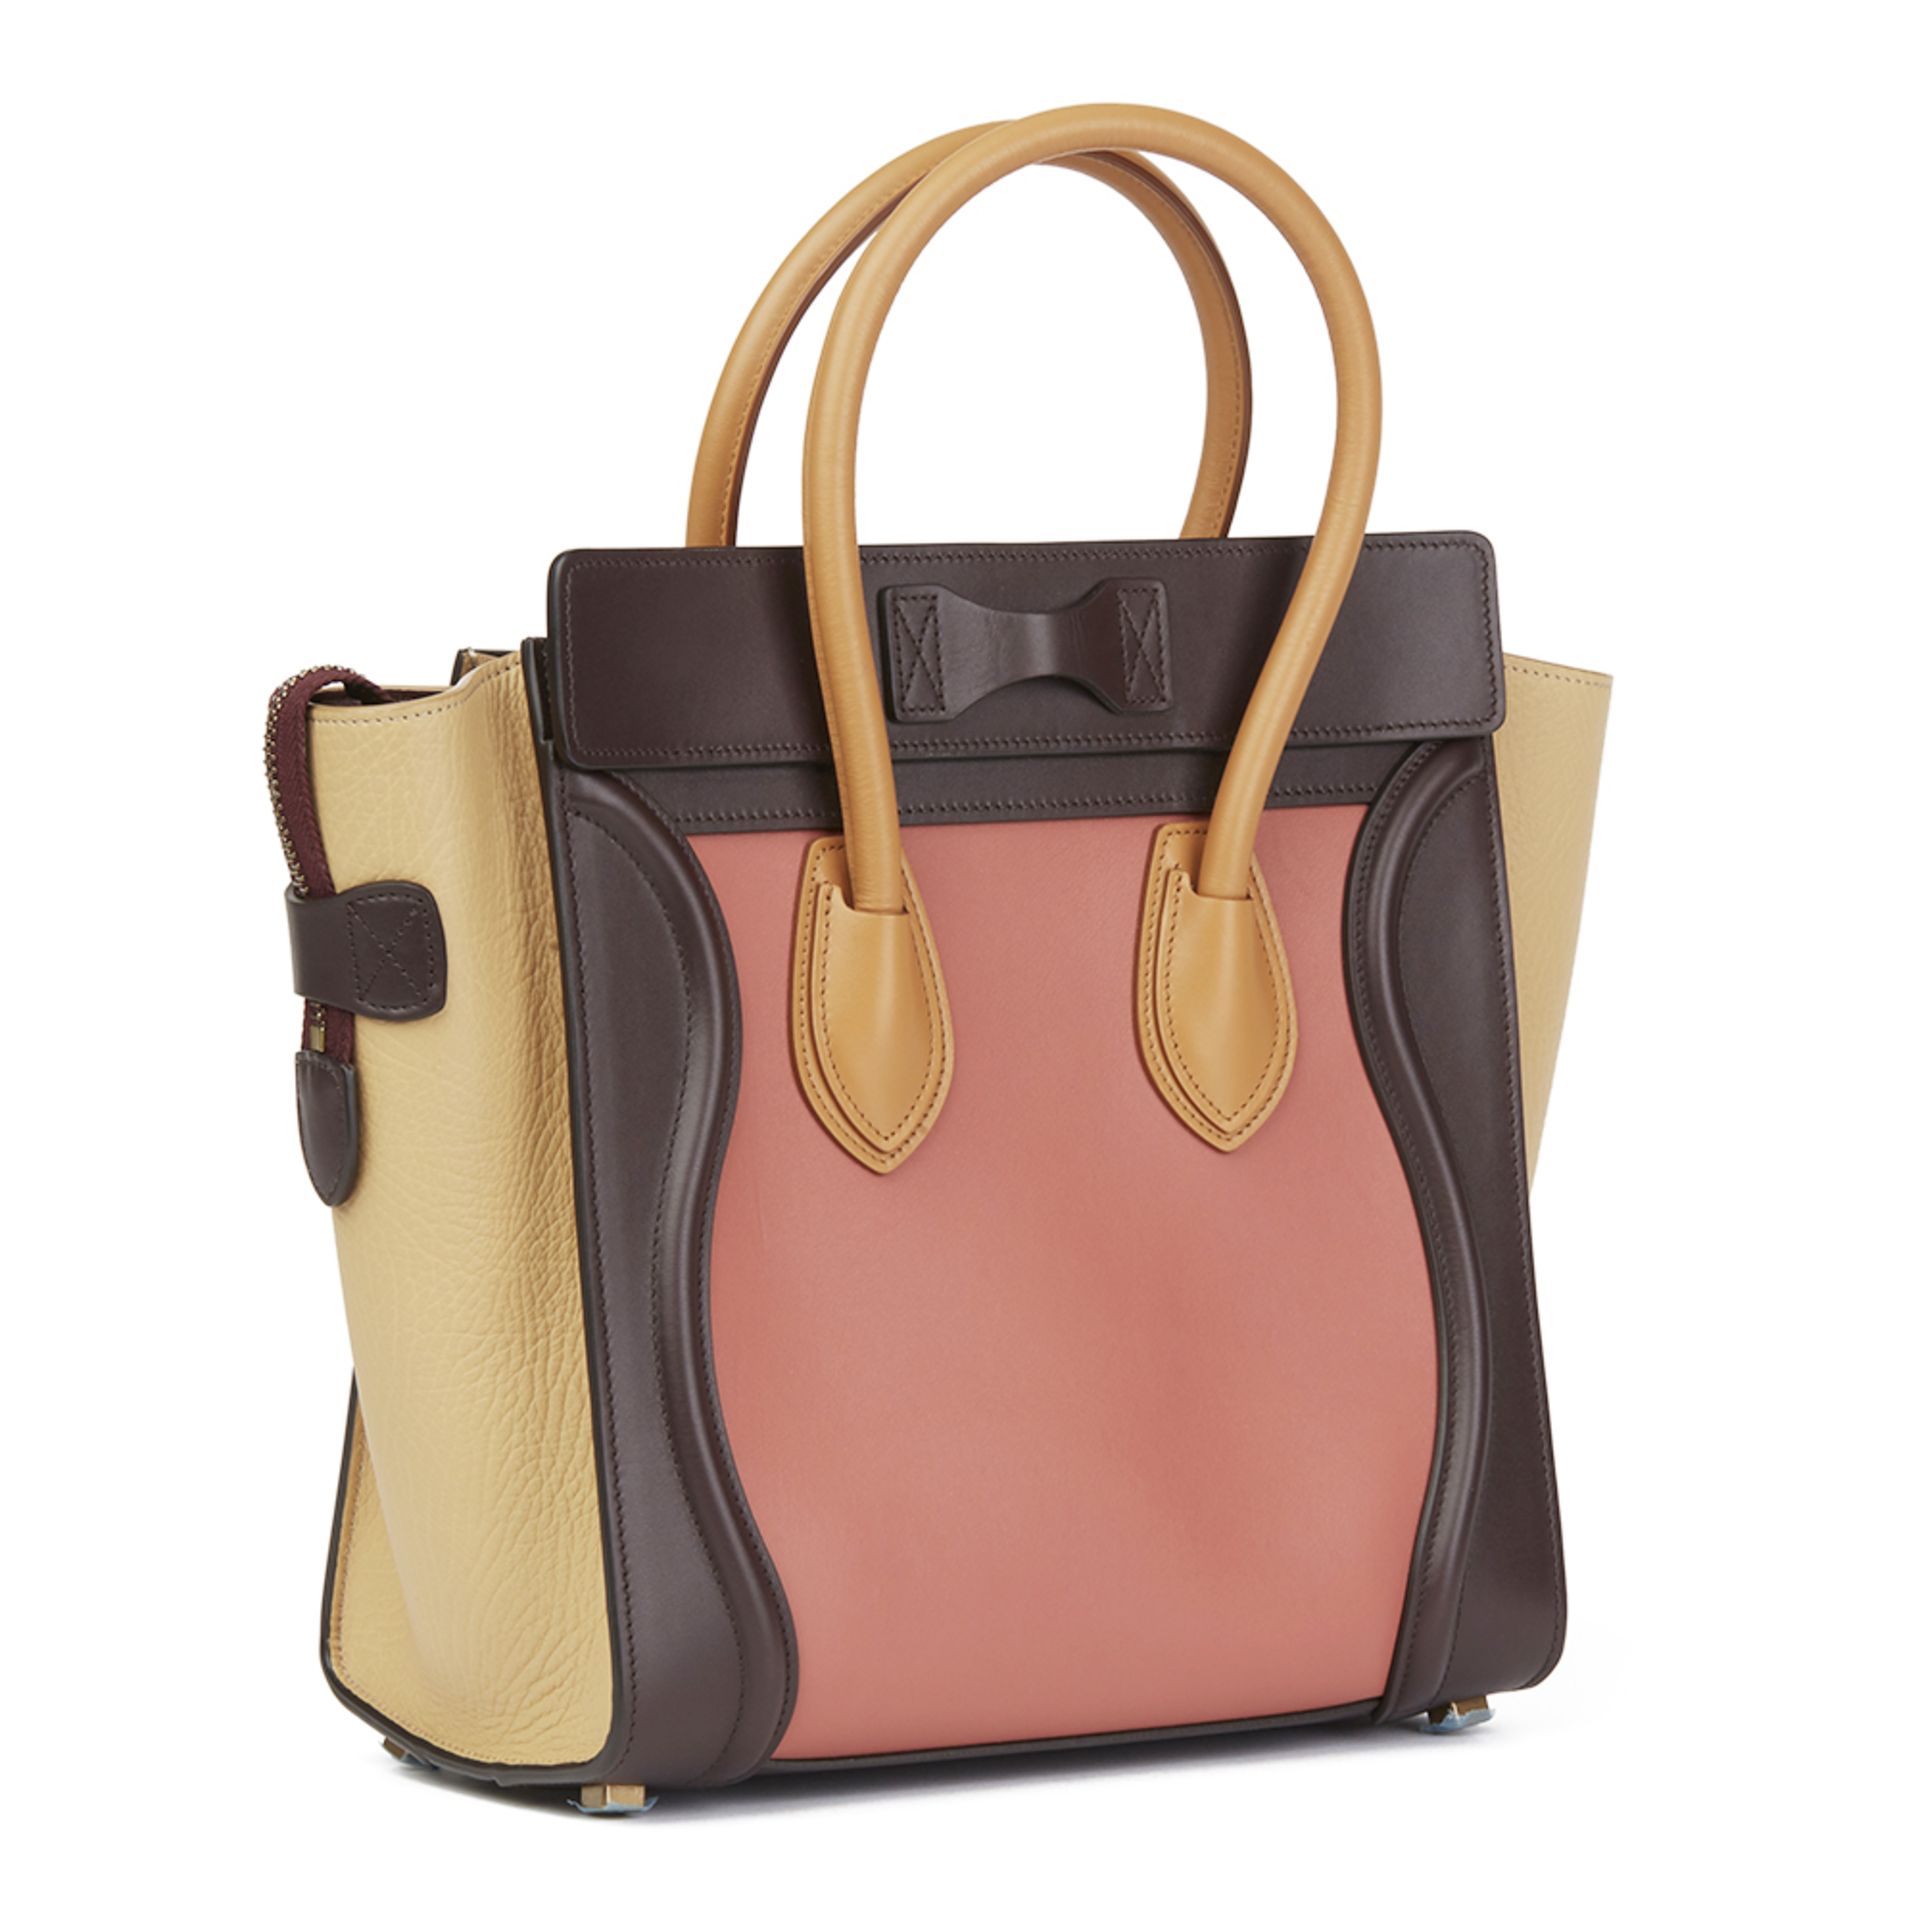 Céline Terracotta Smooth & Elephant Calfskin Leather Micro Luggage Tote - Image 4 of 10